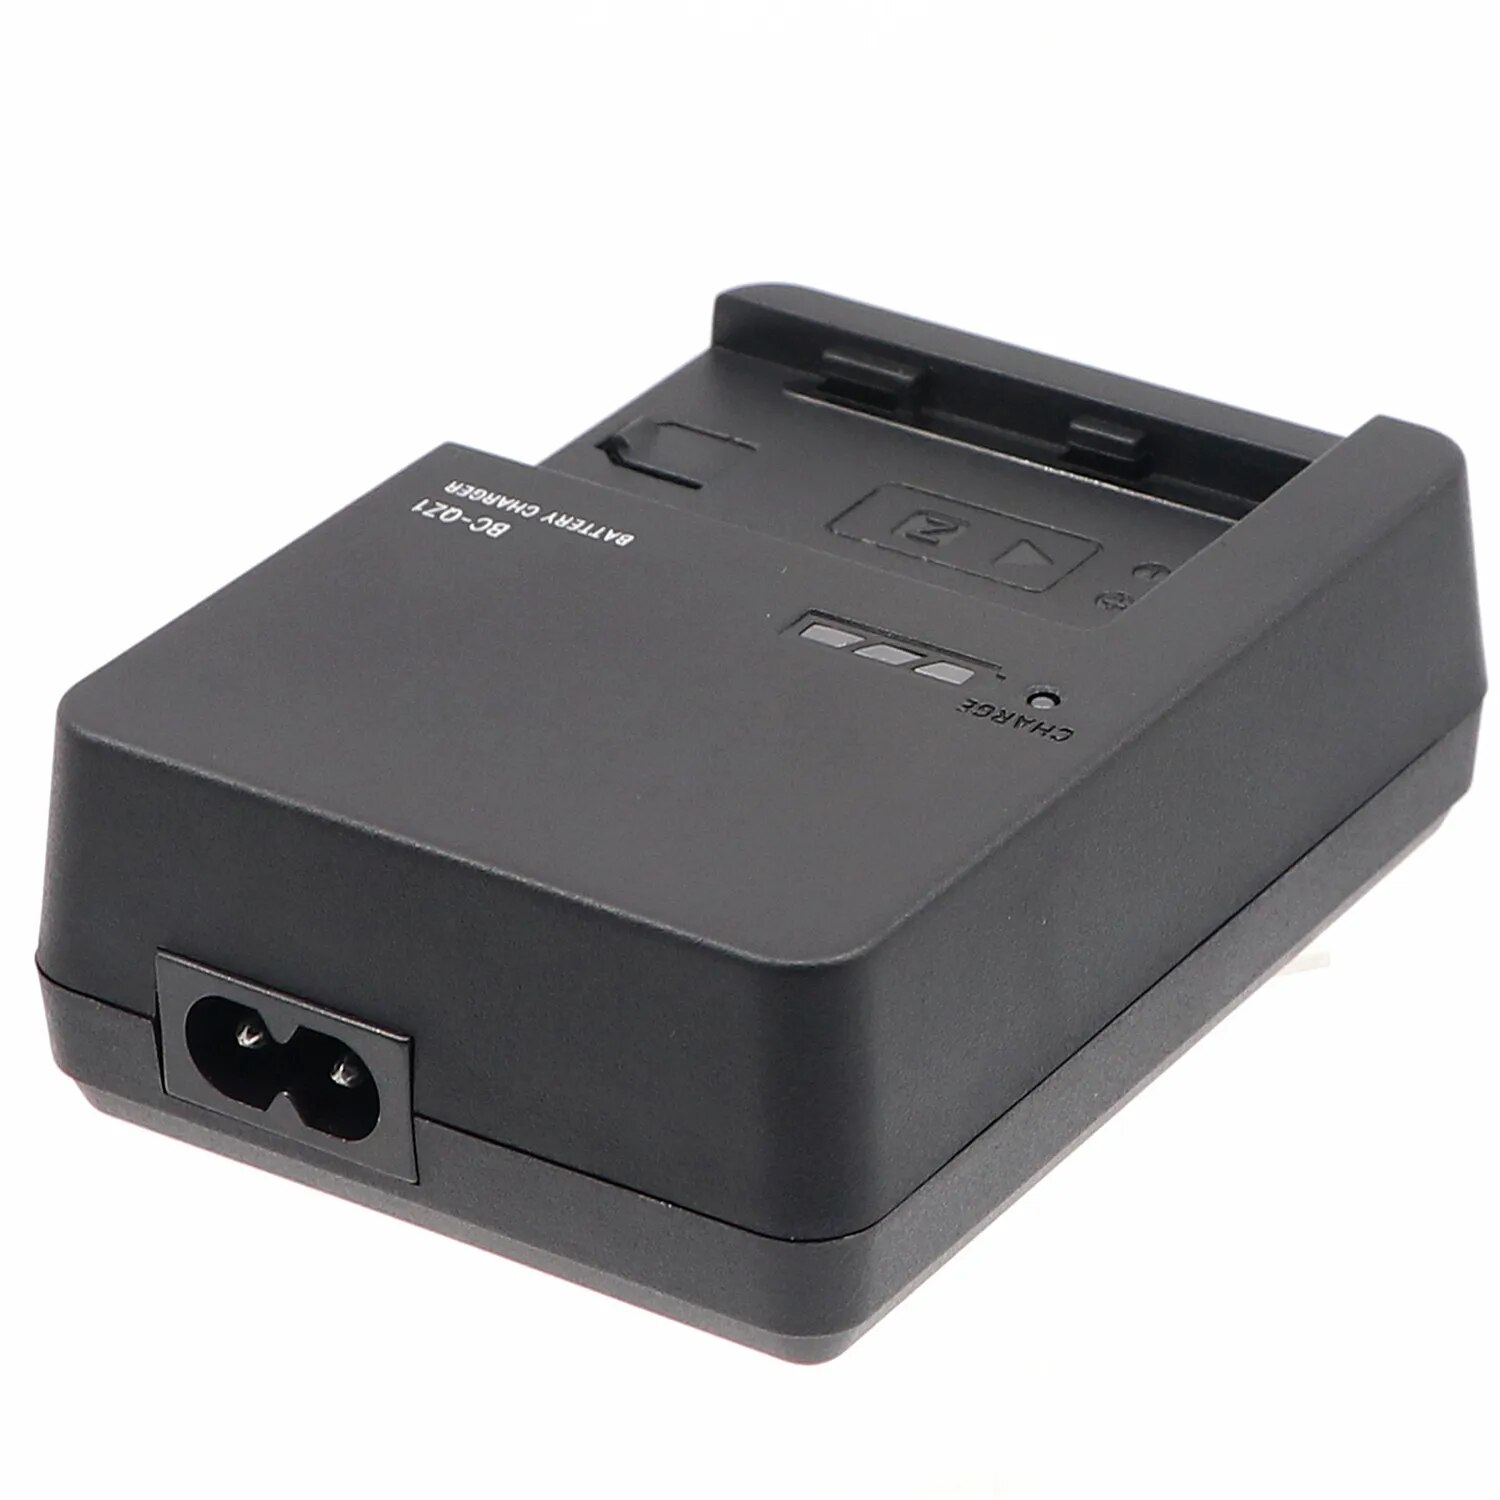 【Hot New Release】 New Bc-Qz1 Charger For Np-Fz100 A7 Iii A7m3 A7r Iii A7rm3 A9 A6600 A9m2